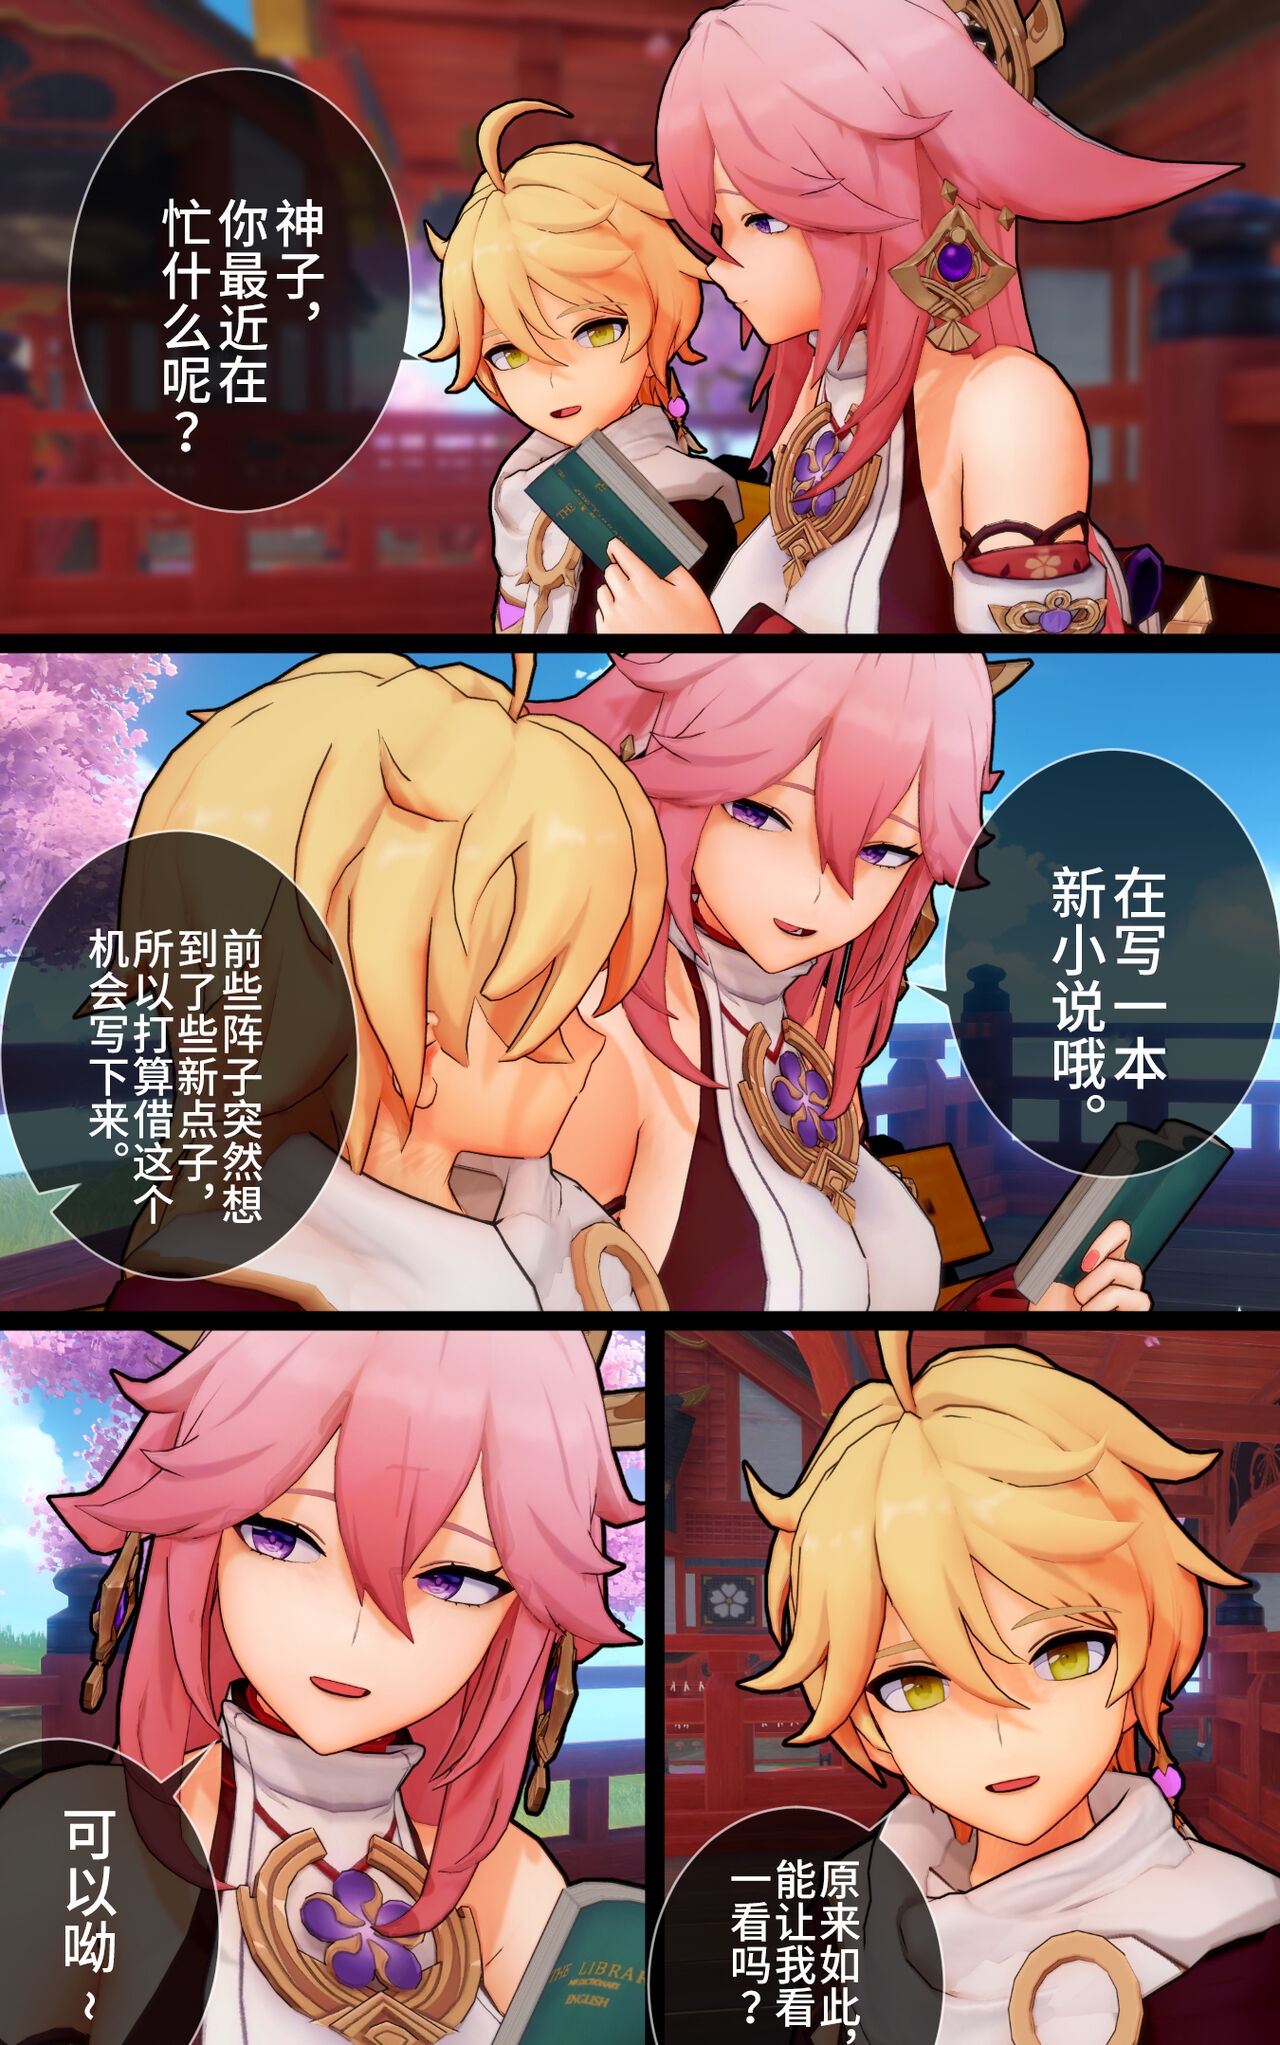 [ActualE] The Vixen And Its Pup (Genshin Impact) [Chinese] [黎欧出资汉化] [Decensored] 4